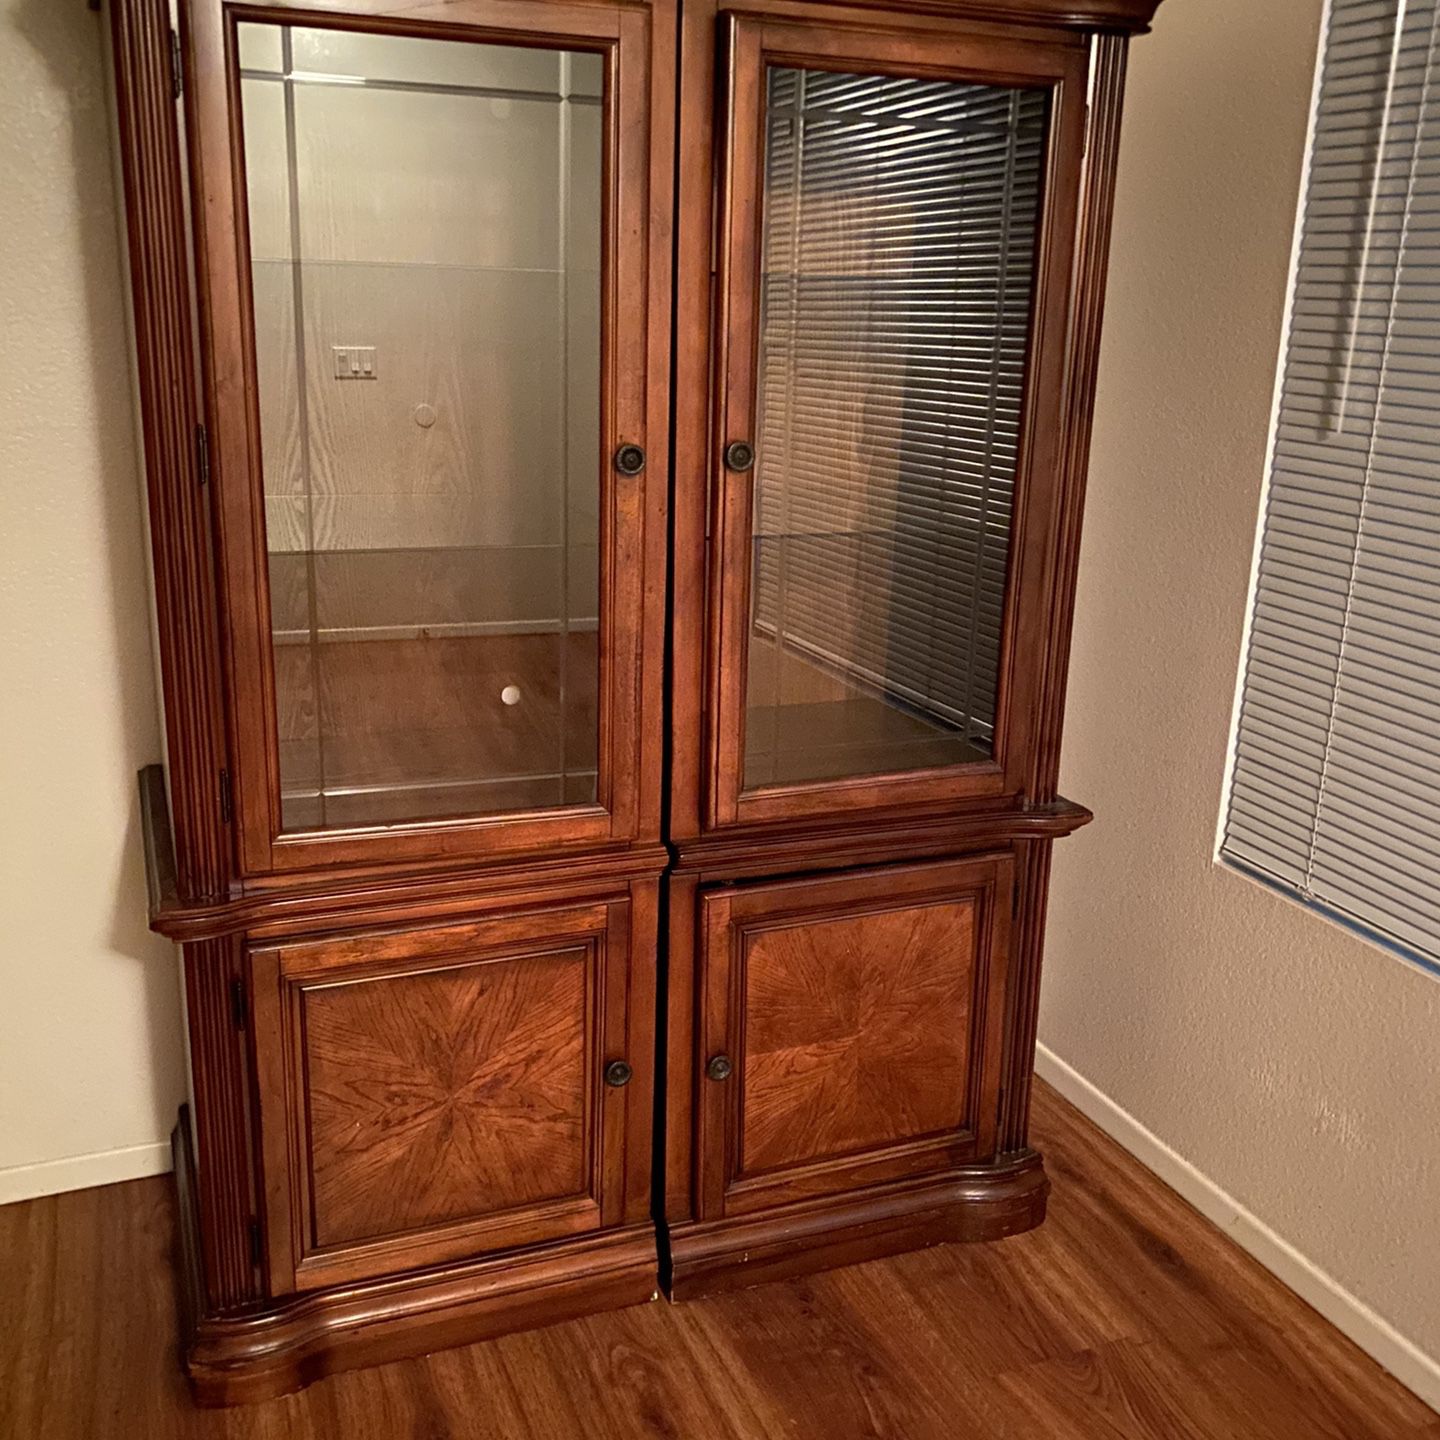 Two Display Cabinets Each With 2glass Shelves  , Each Cabinet Has A Bottom Drawer For Extra Storage...$40 OBO